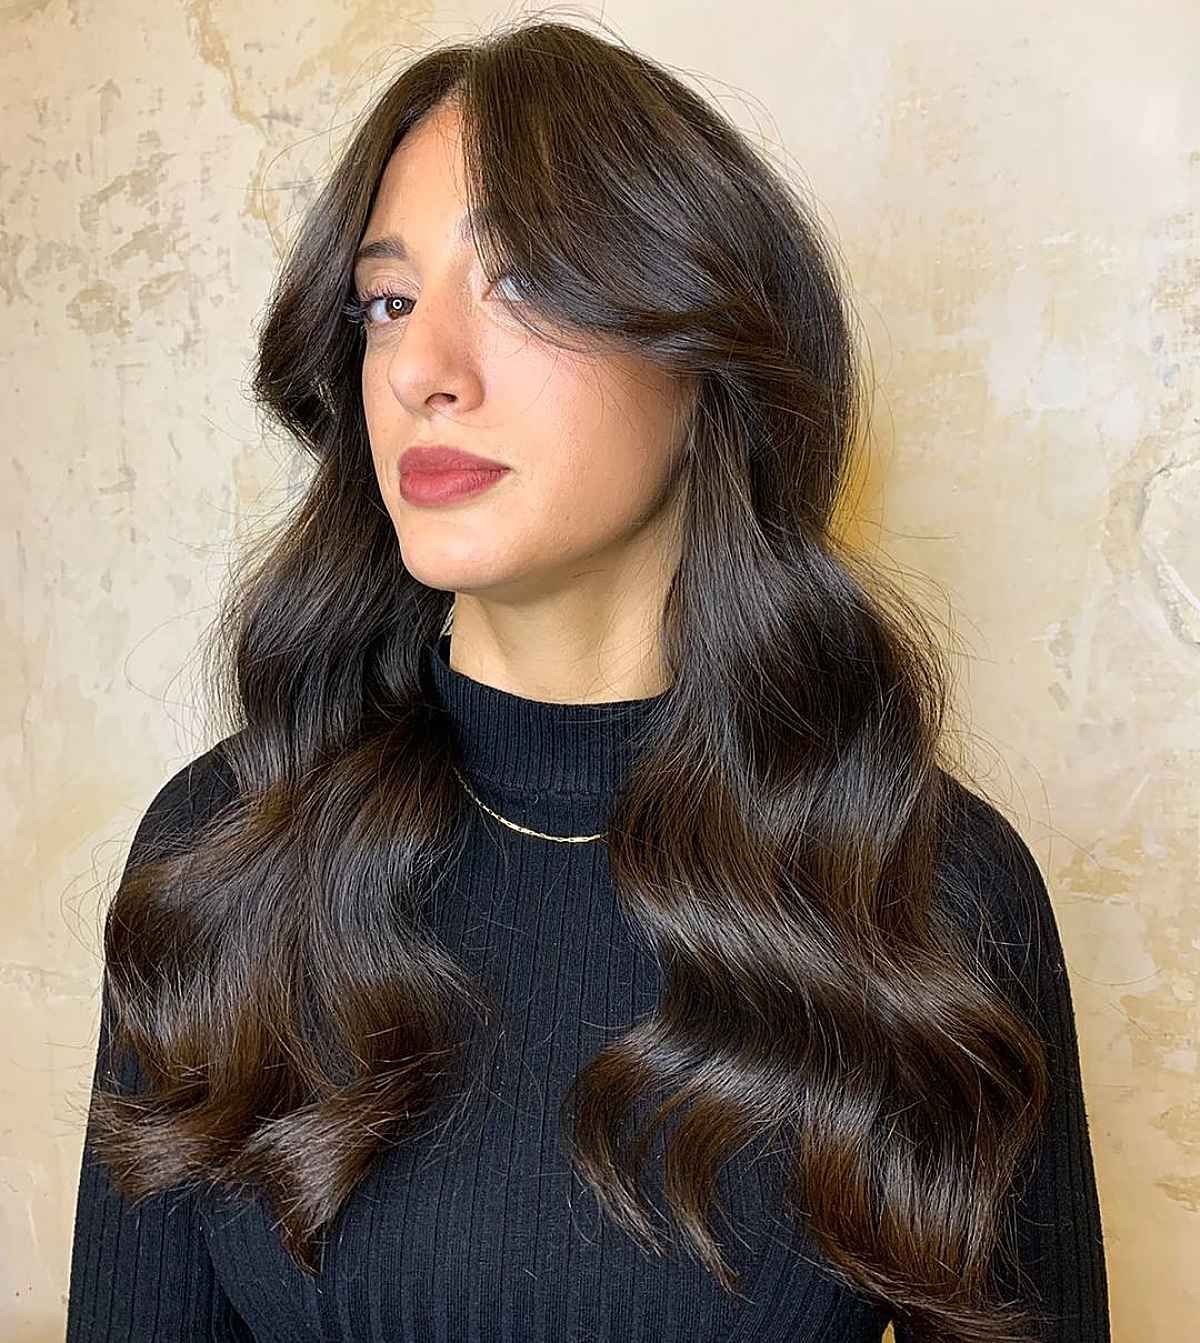 Pairing Curtain Bangs With Wavy Hair? 22 Best Ways To Do It For Widely Used Loose Waves With Unshowy Curtain Bangs (View 6 of 15)